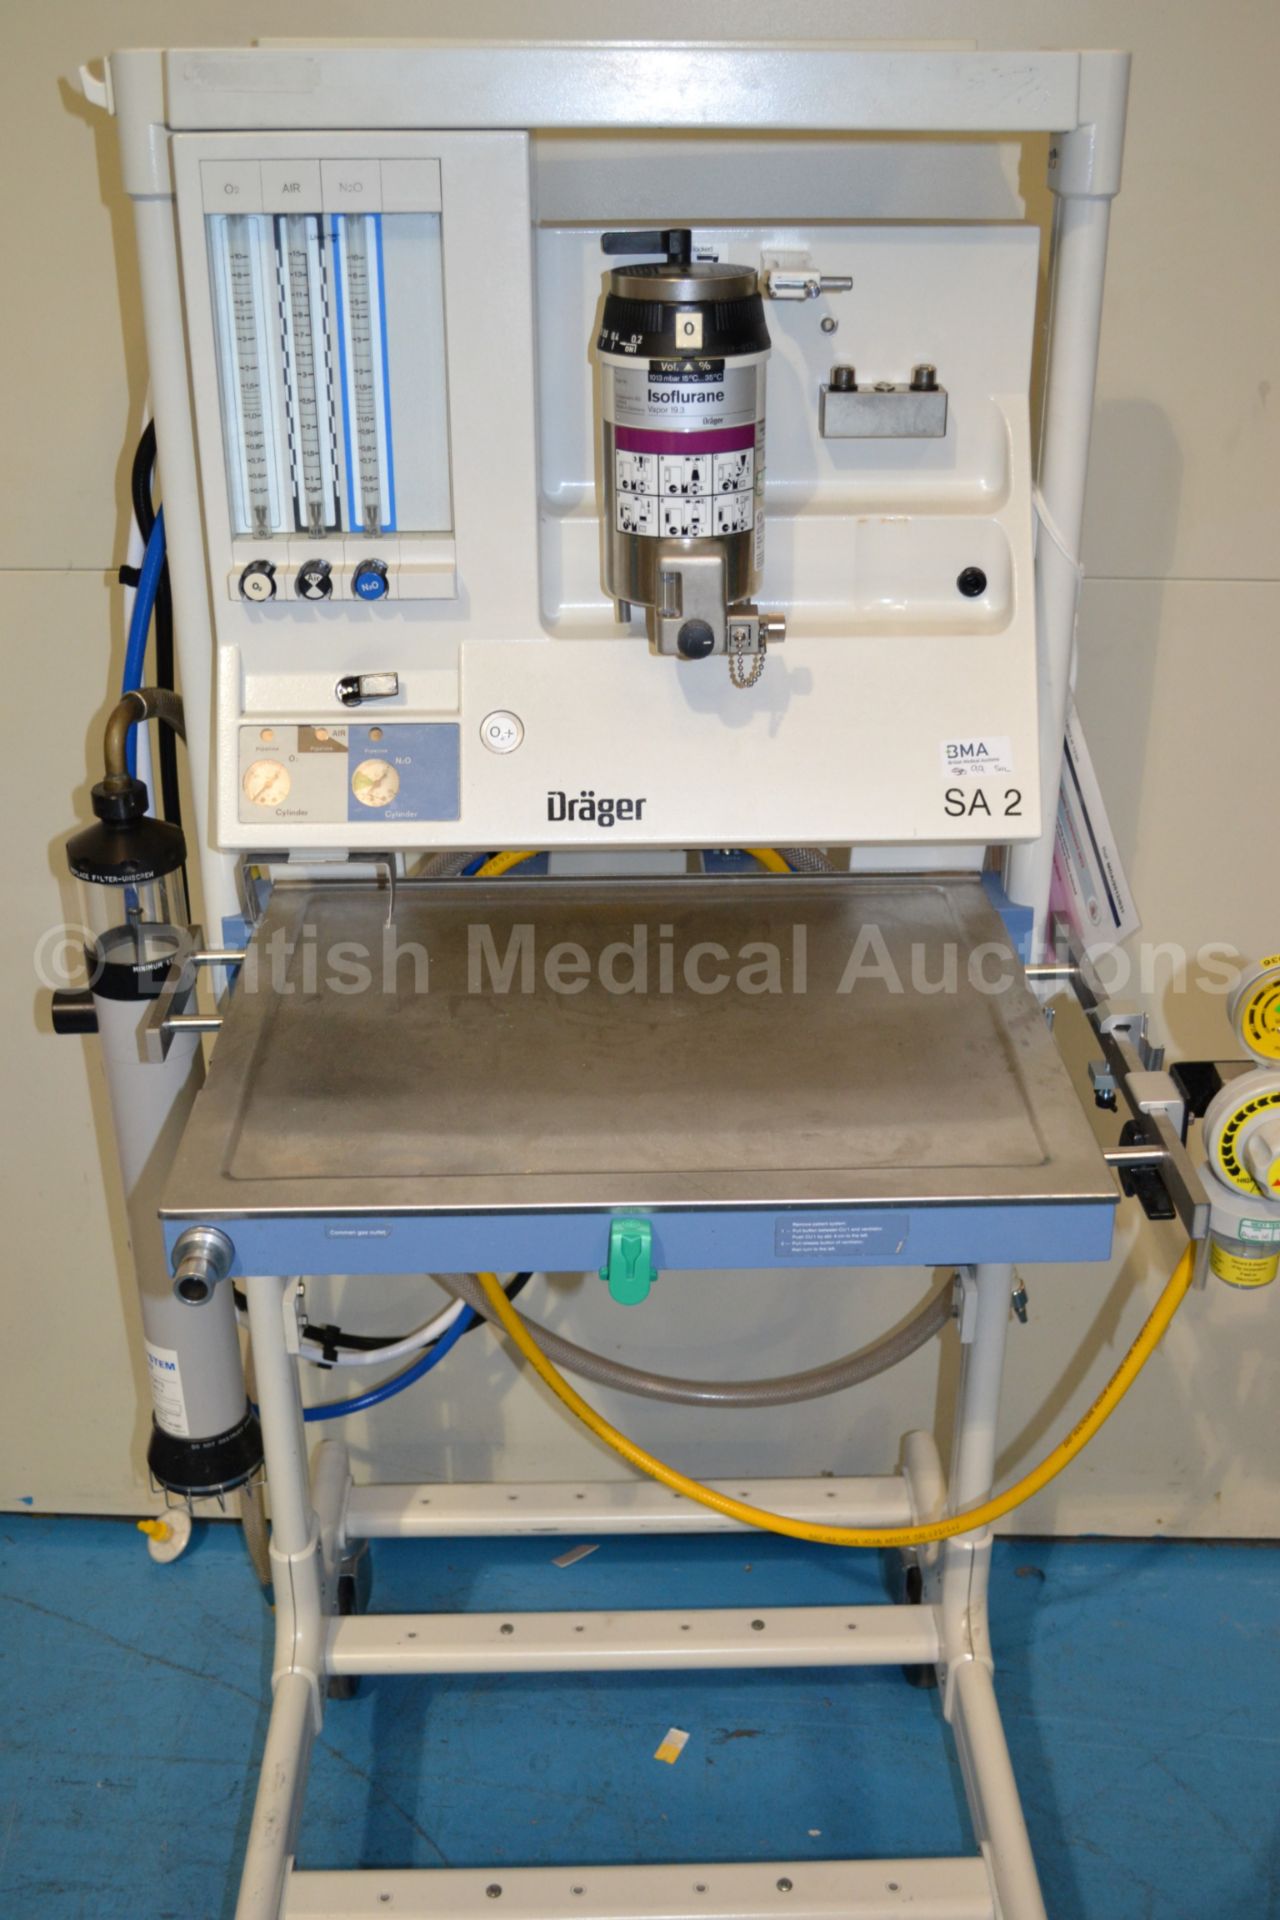 Drager SA 2 Anaesthesia System with Drager Vapor 1 - Image 3 of 4